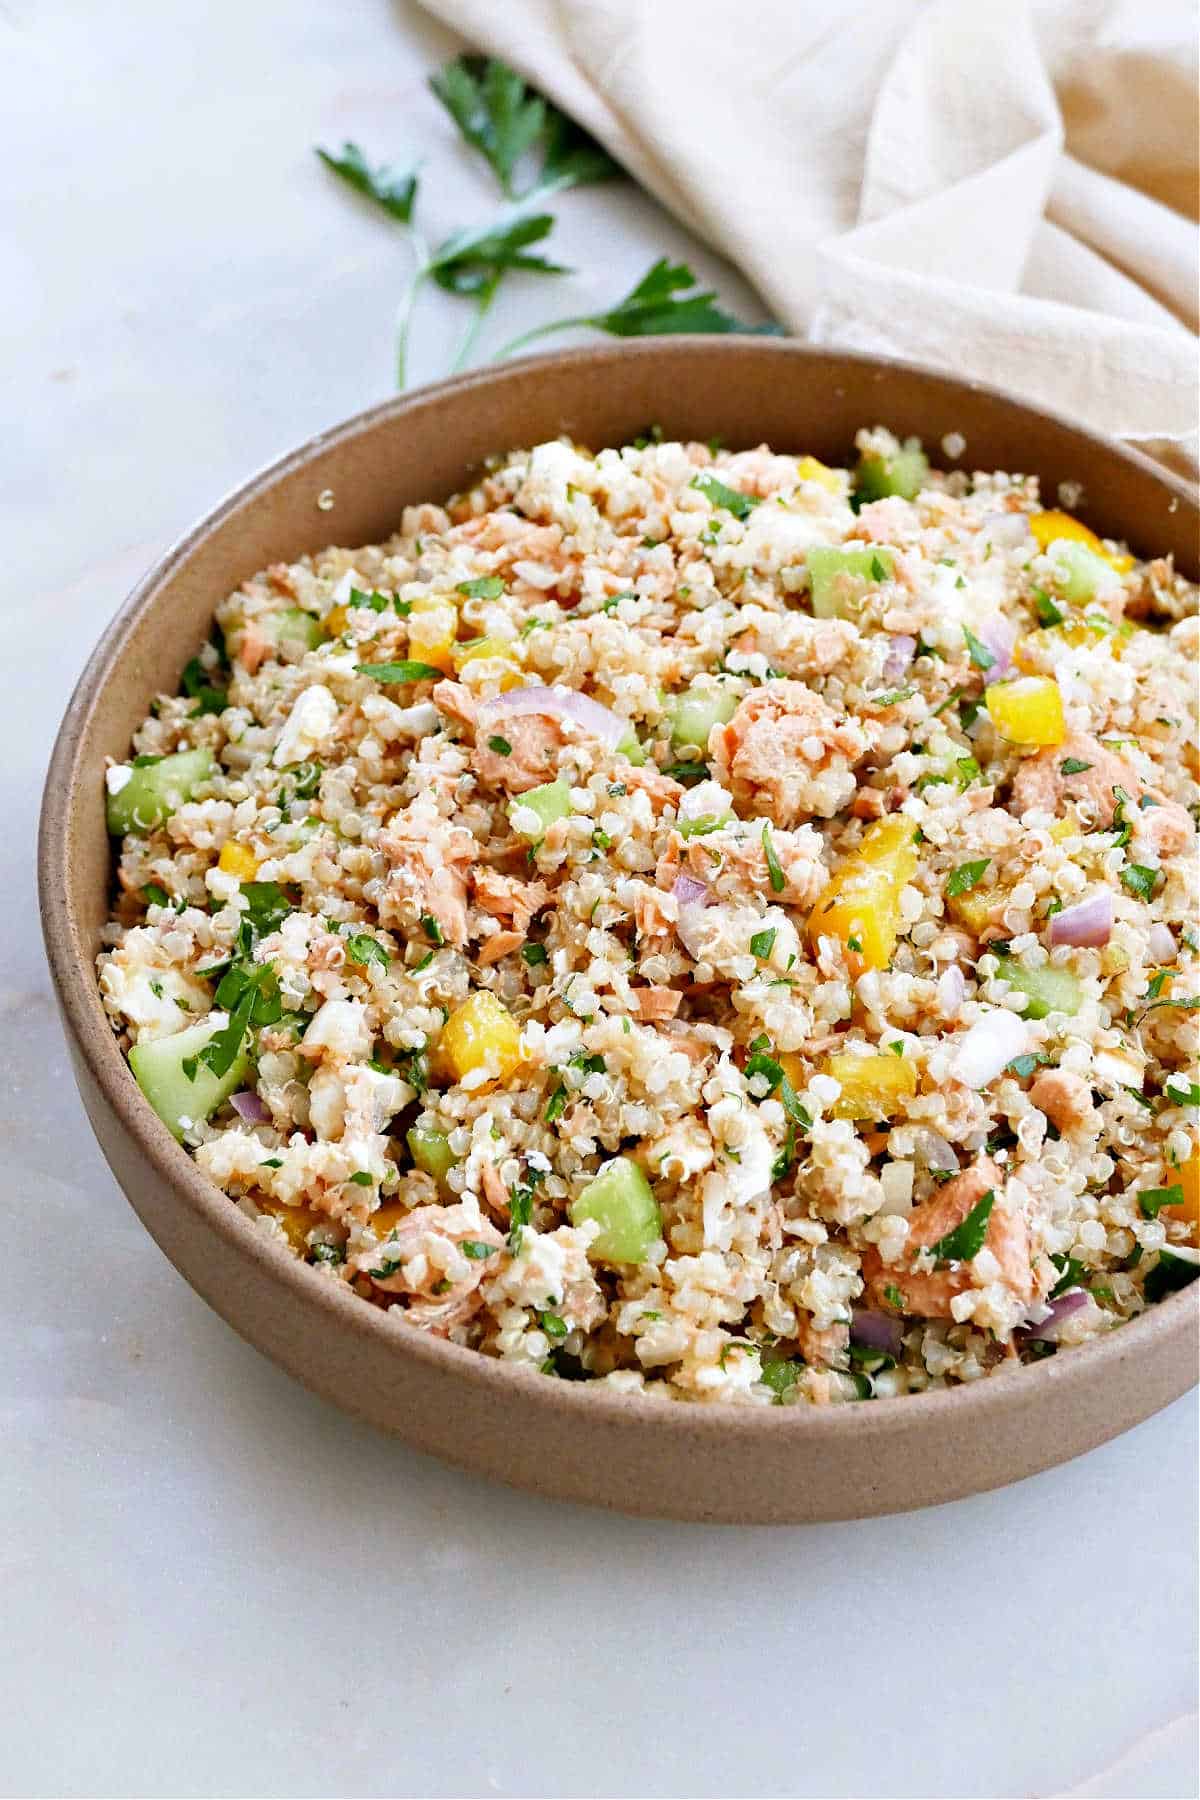 quinoa salad with canned salmon, vegetables, and feta cheese in a serving bowl